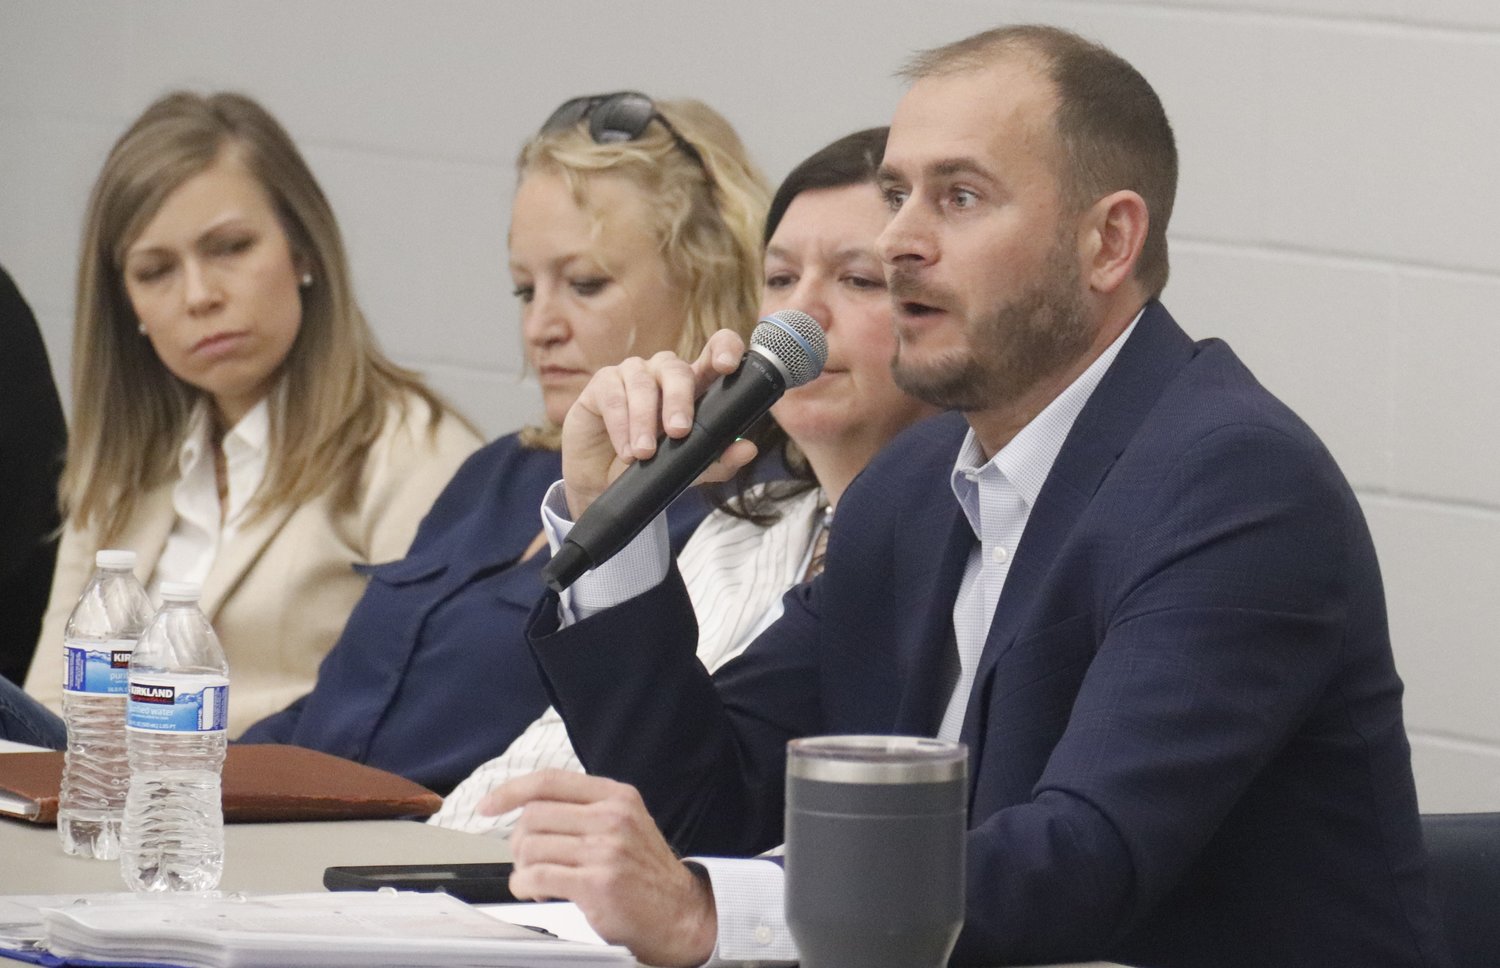 Wright City school board candidate Frank Zykan (right) answers a question at last week’s Meet the Candidate night at Wright City Middle School. Also pictured are school board candidates Beth Dean, Heidi Box Halleman, and Monica Heppermann.